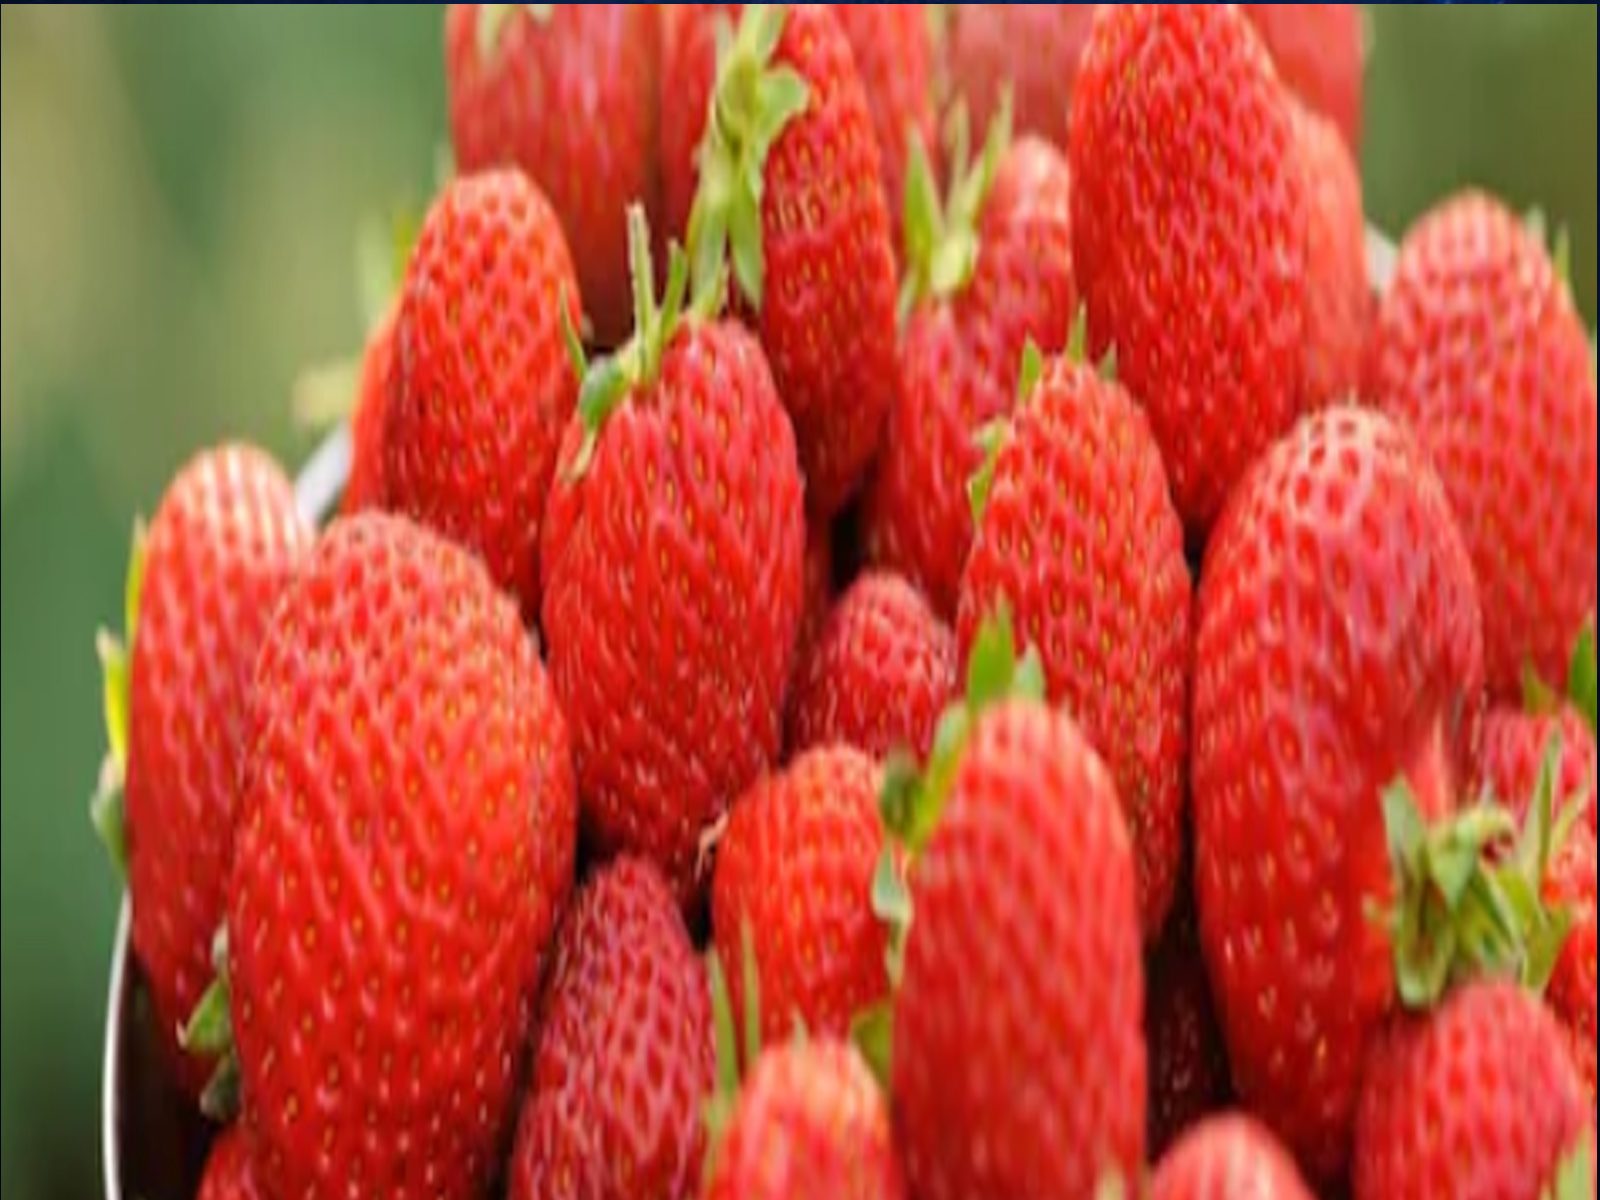  Strawberry is very useful for heart patients